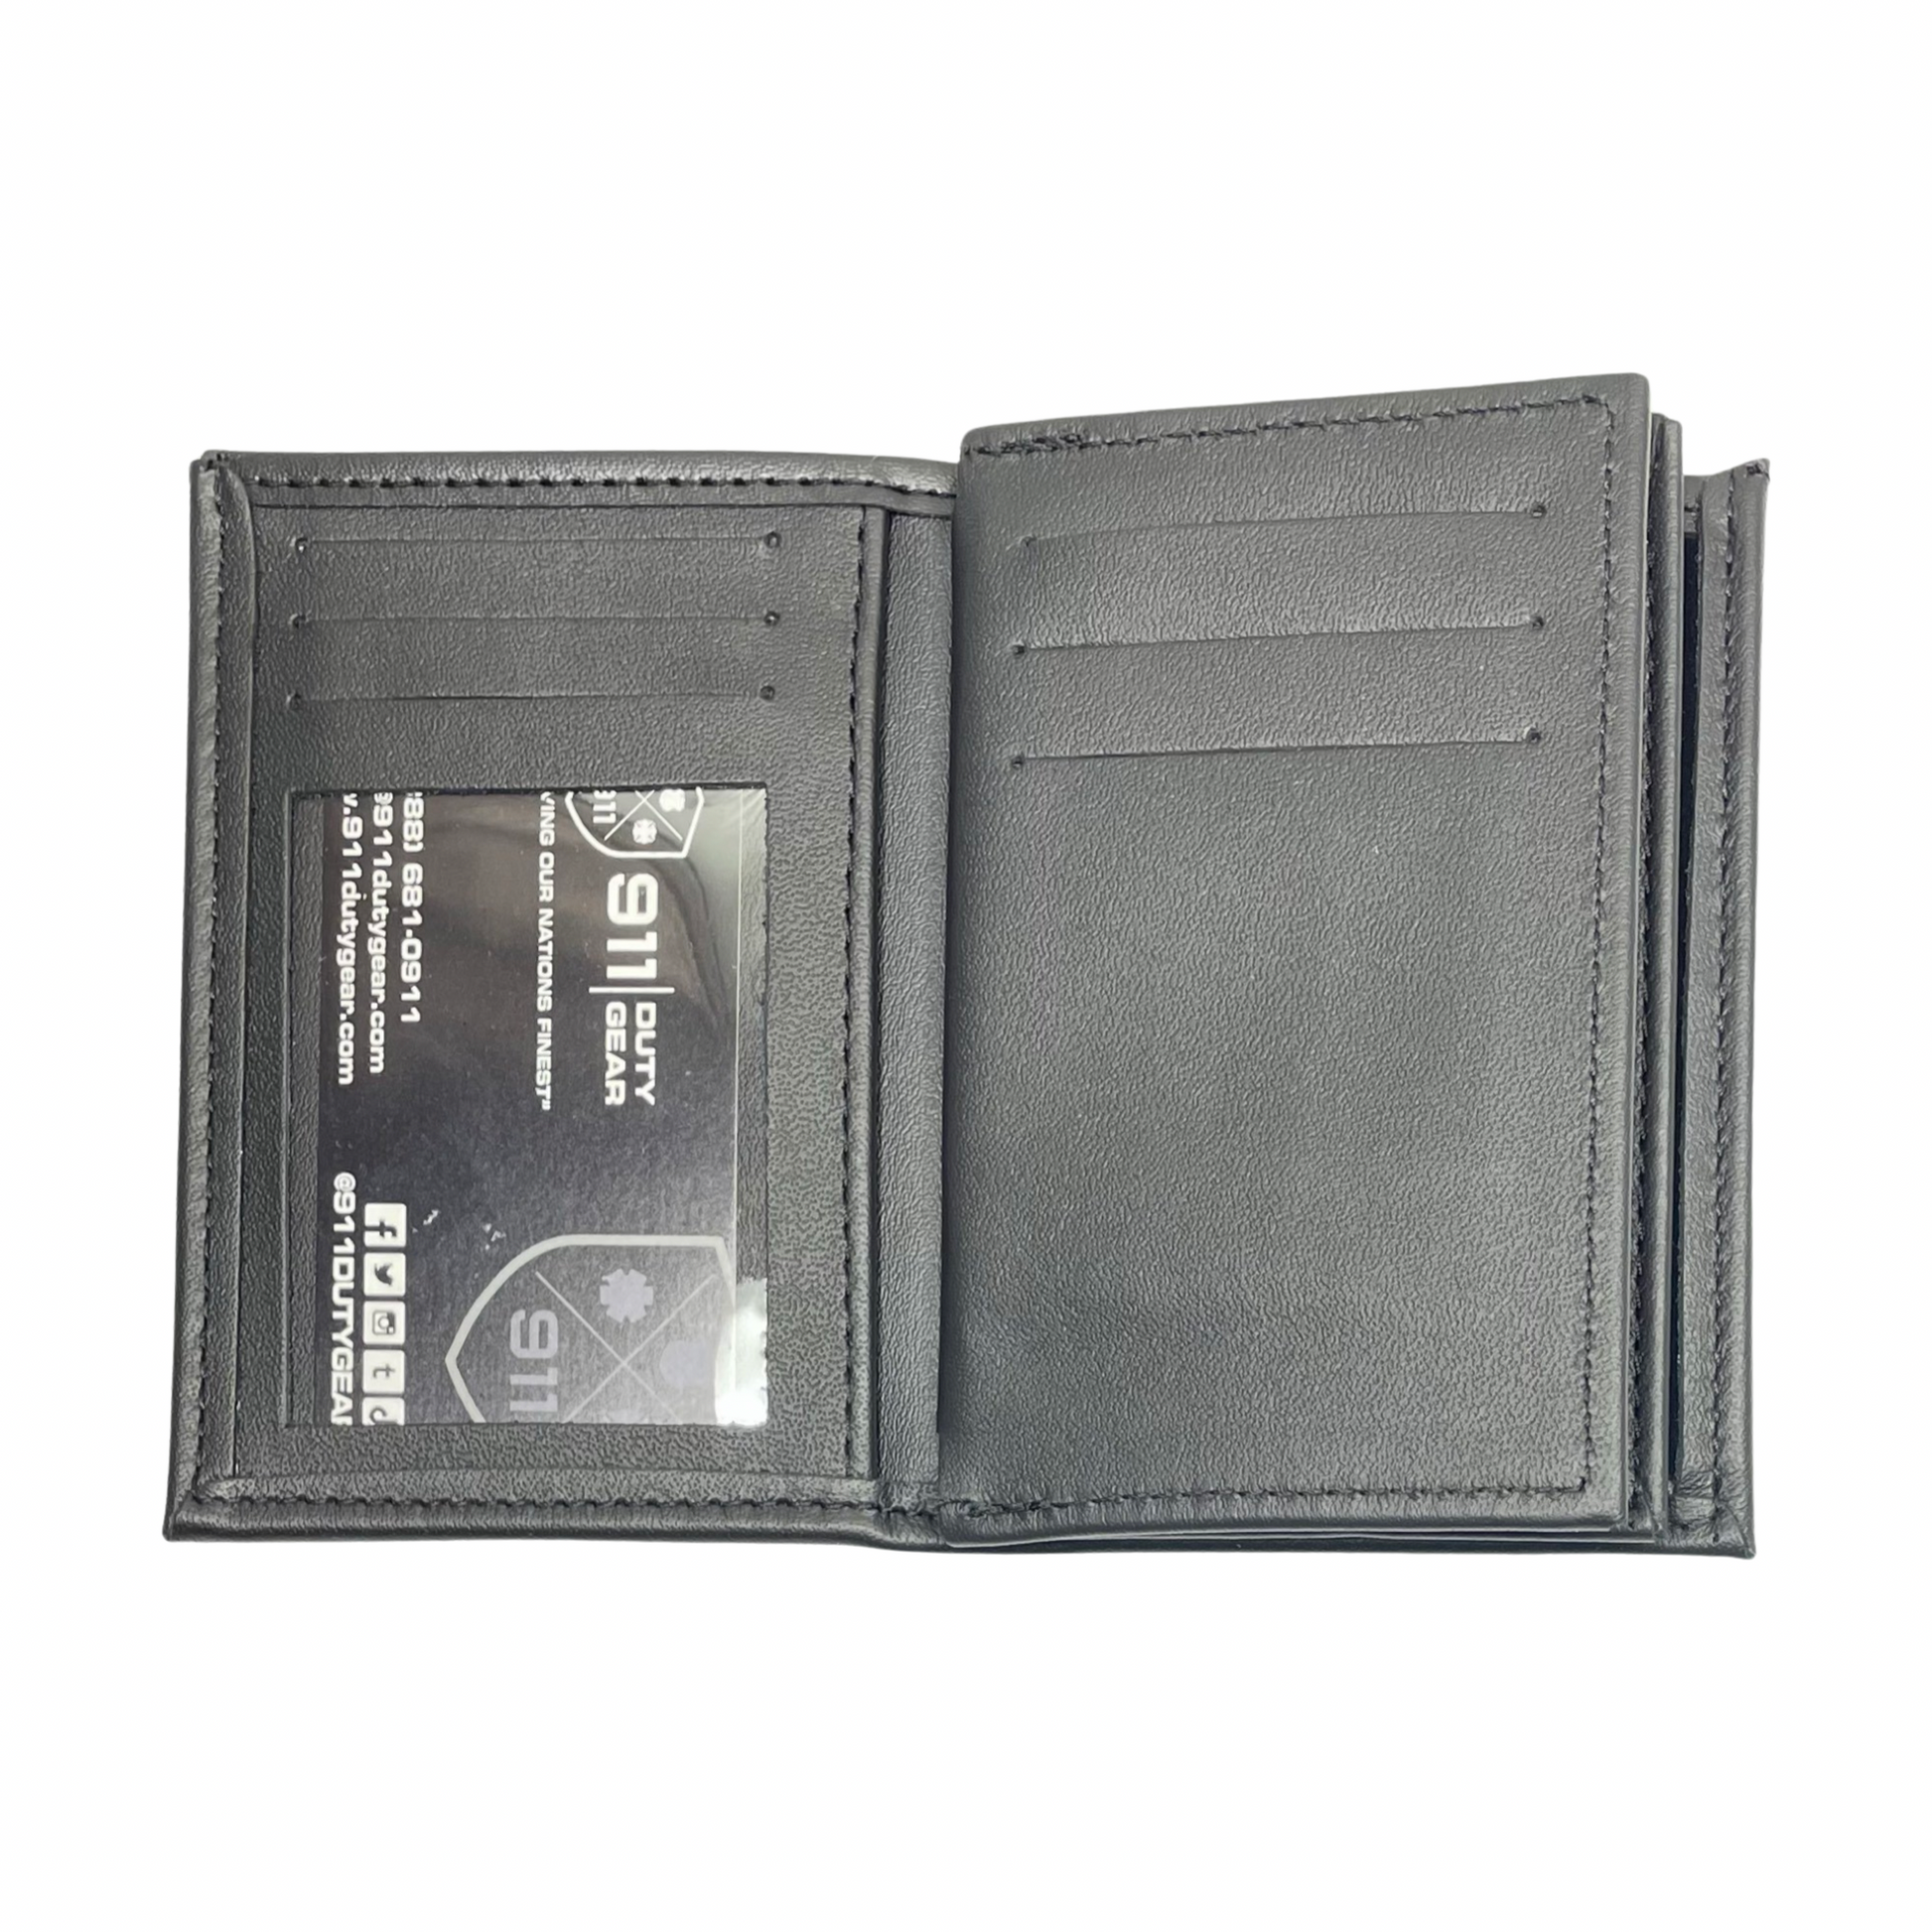 ICE | U.S. Immigration and Customs Enforcement Horizontal Bifold Double ID Credential & Hidden (2.5in) Badge Wallet-Perfect Fit-911 Duty Gear USA